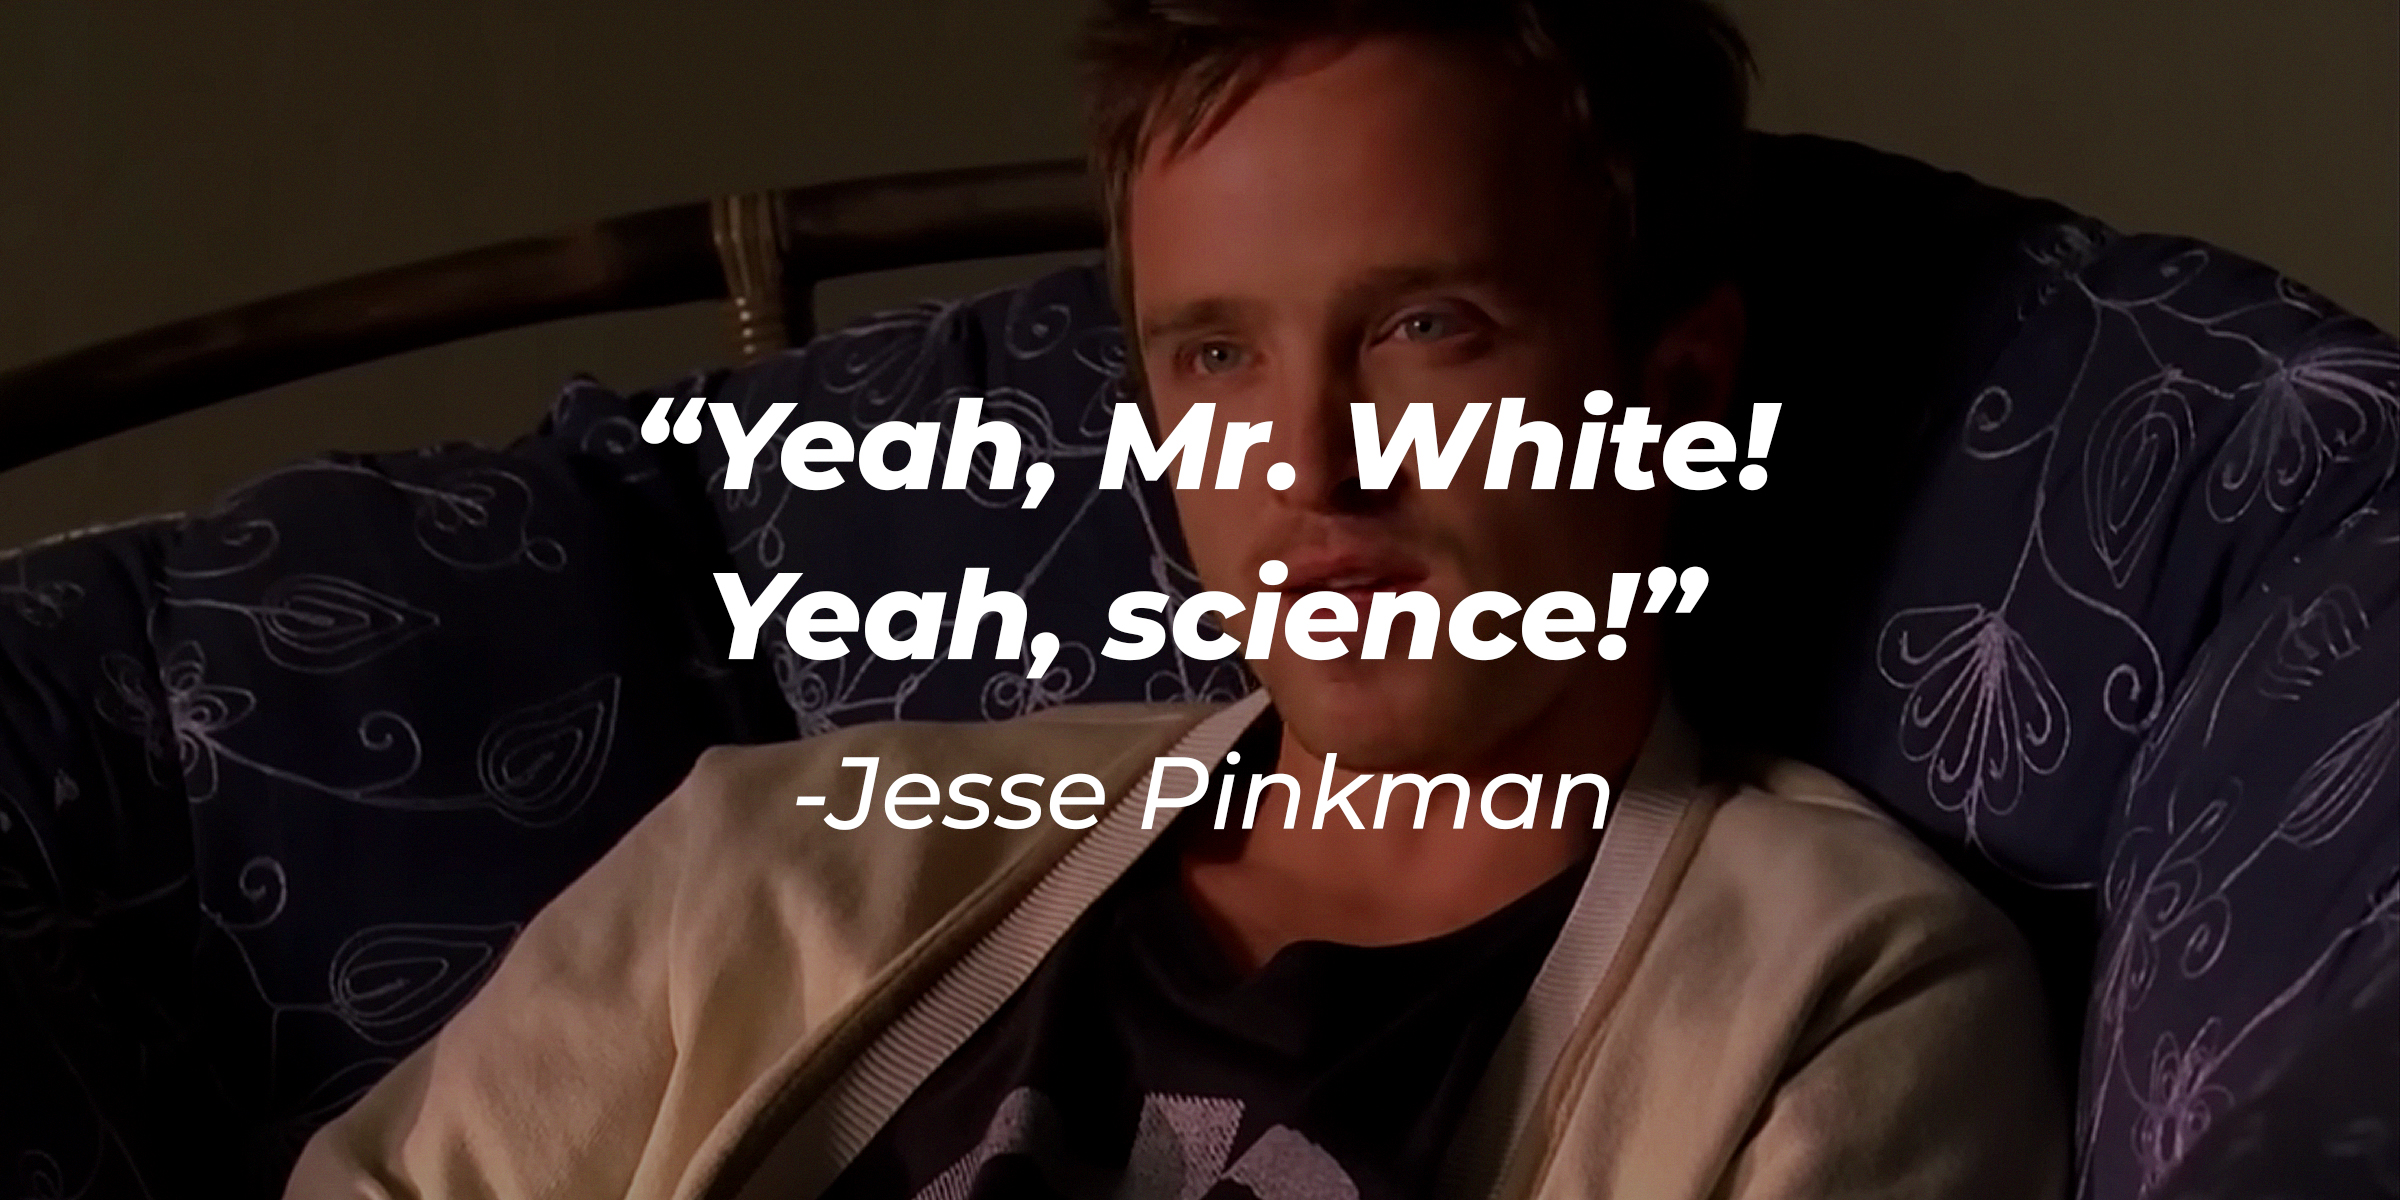 An image of Jesse Pinkman, with his quote: “Yeah, Mr. White! Yeah, science!” | Source: Youtube.com/breakingbad